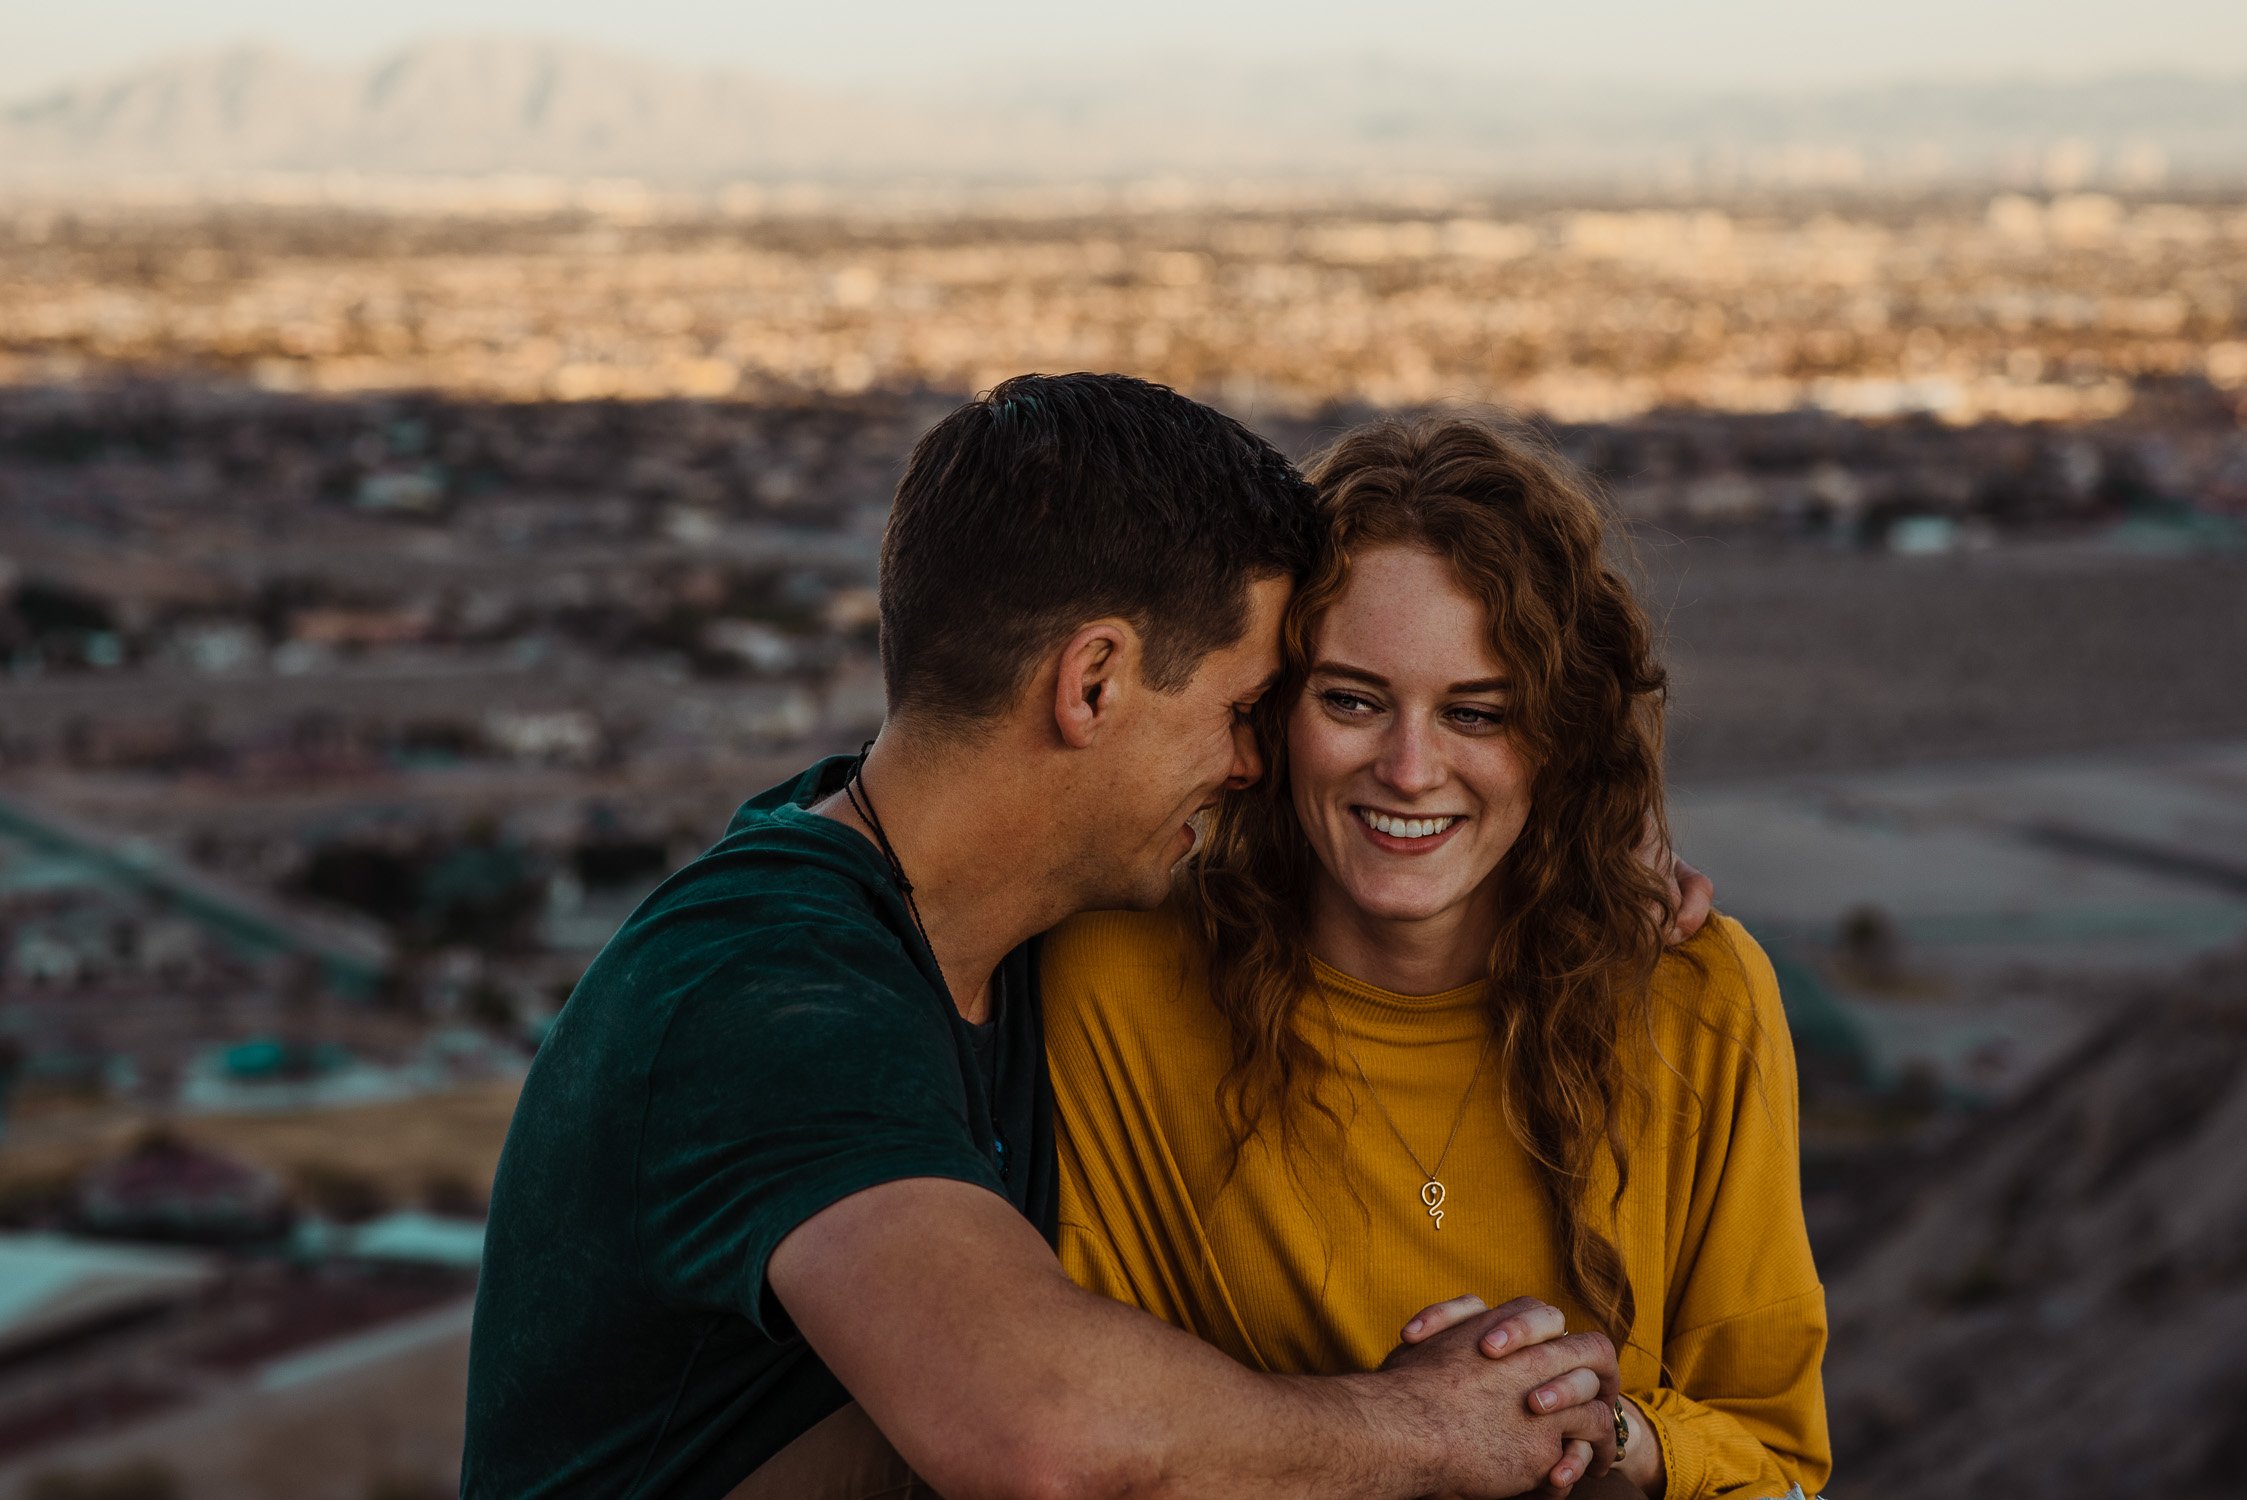 couples photography in las vegas at lone mountain during golden hour